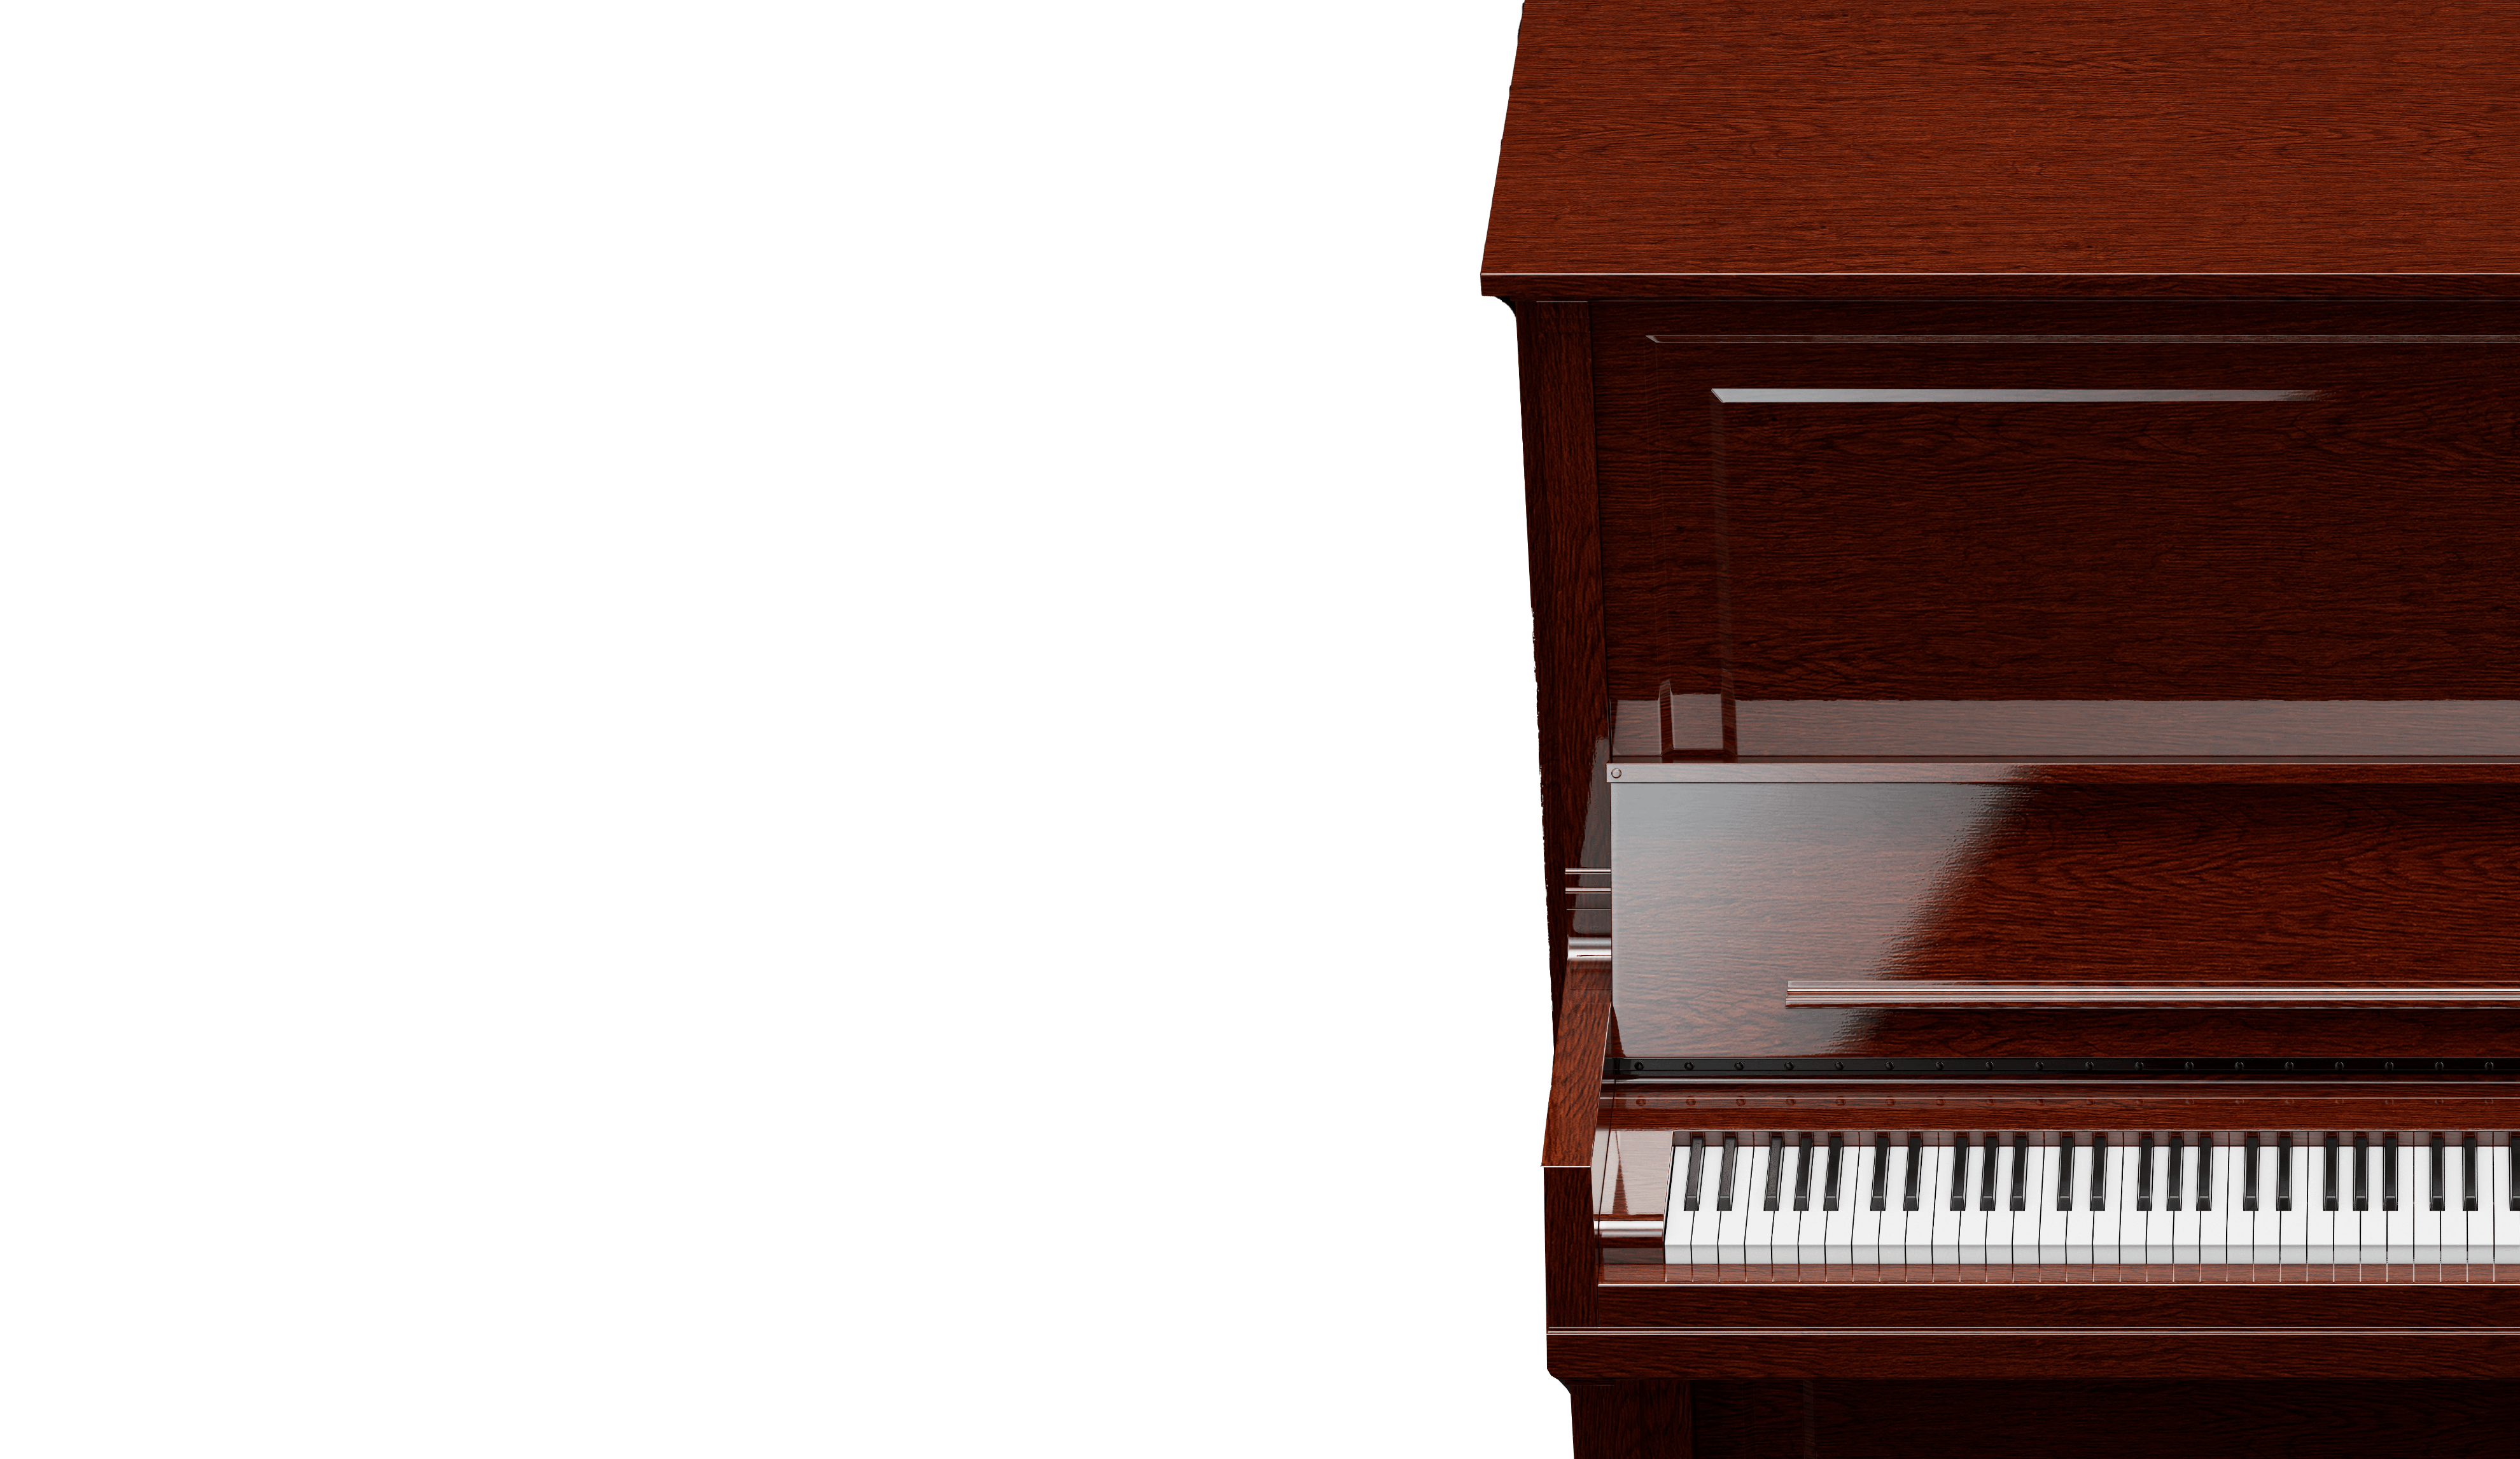 A VARIETY OF PREPARED PIANO OPTIONS